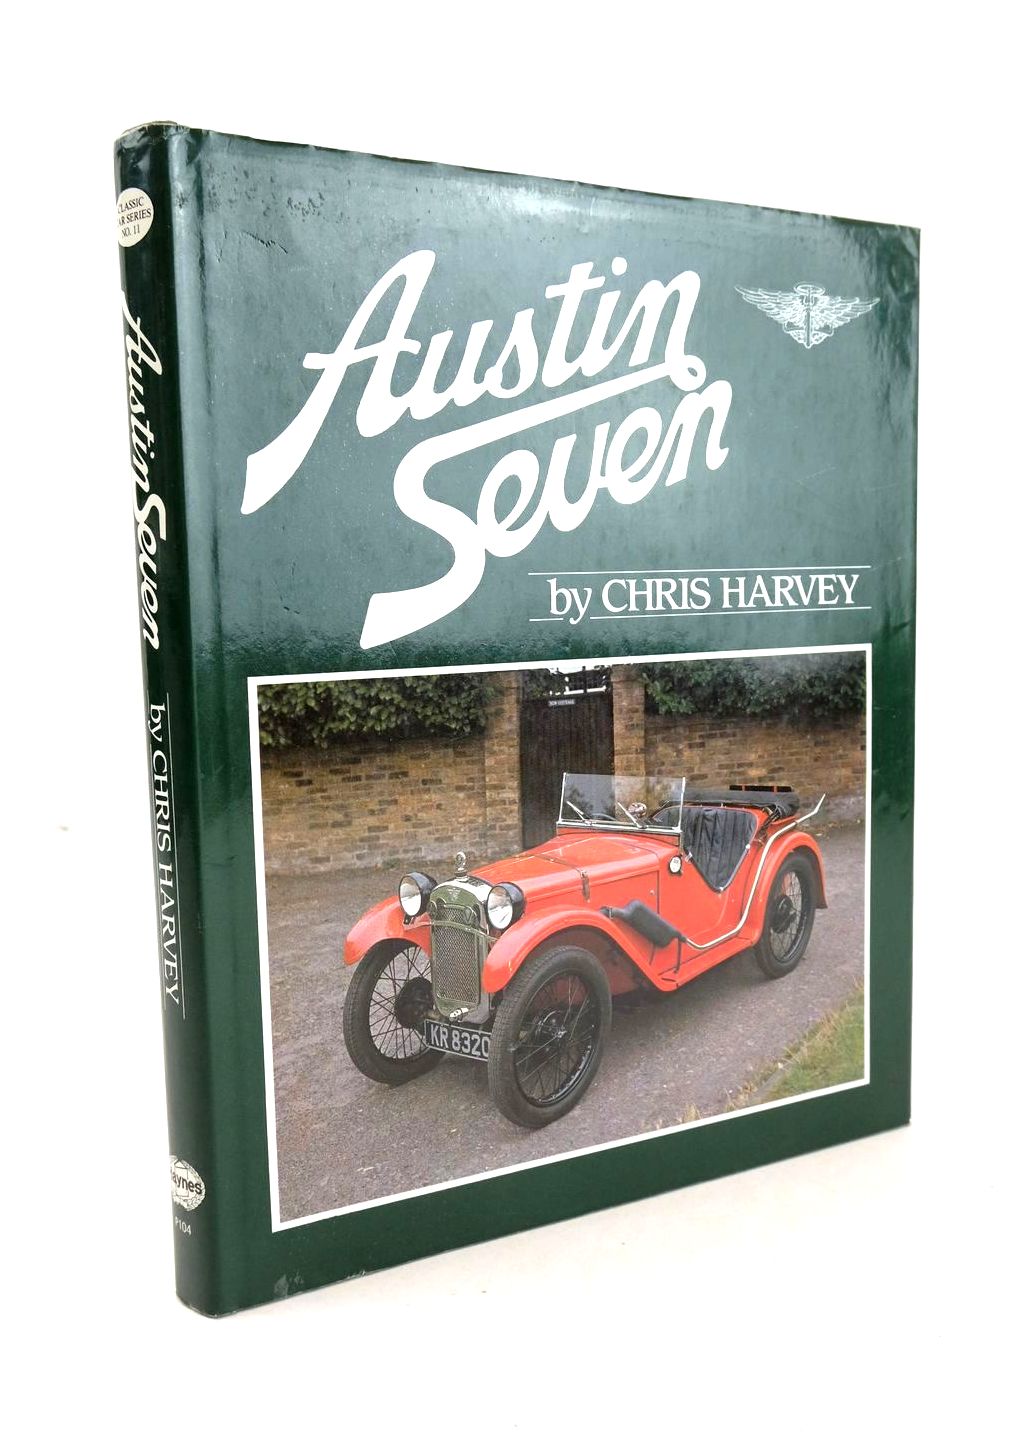 Photo of AUSTIN SEVEN written by Harvey, Chris published by The Oxford Illustrated Press (STOCK CODE: 1326534)  for sale by Stella & Rose's Books